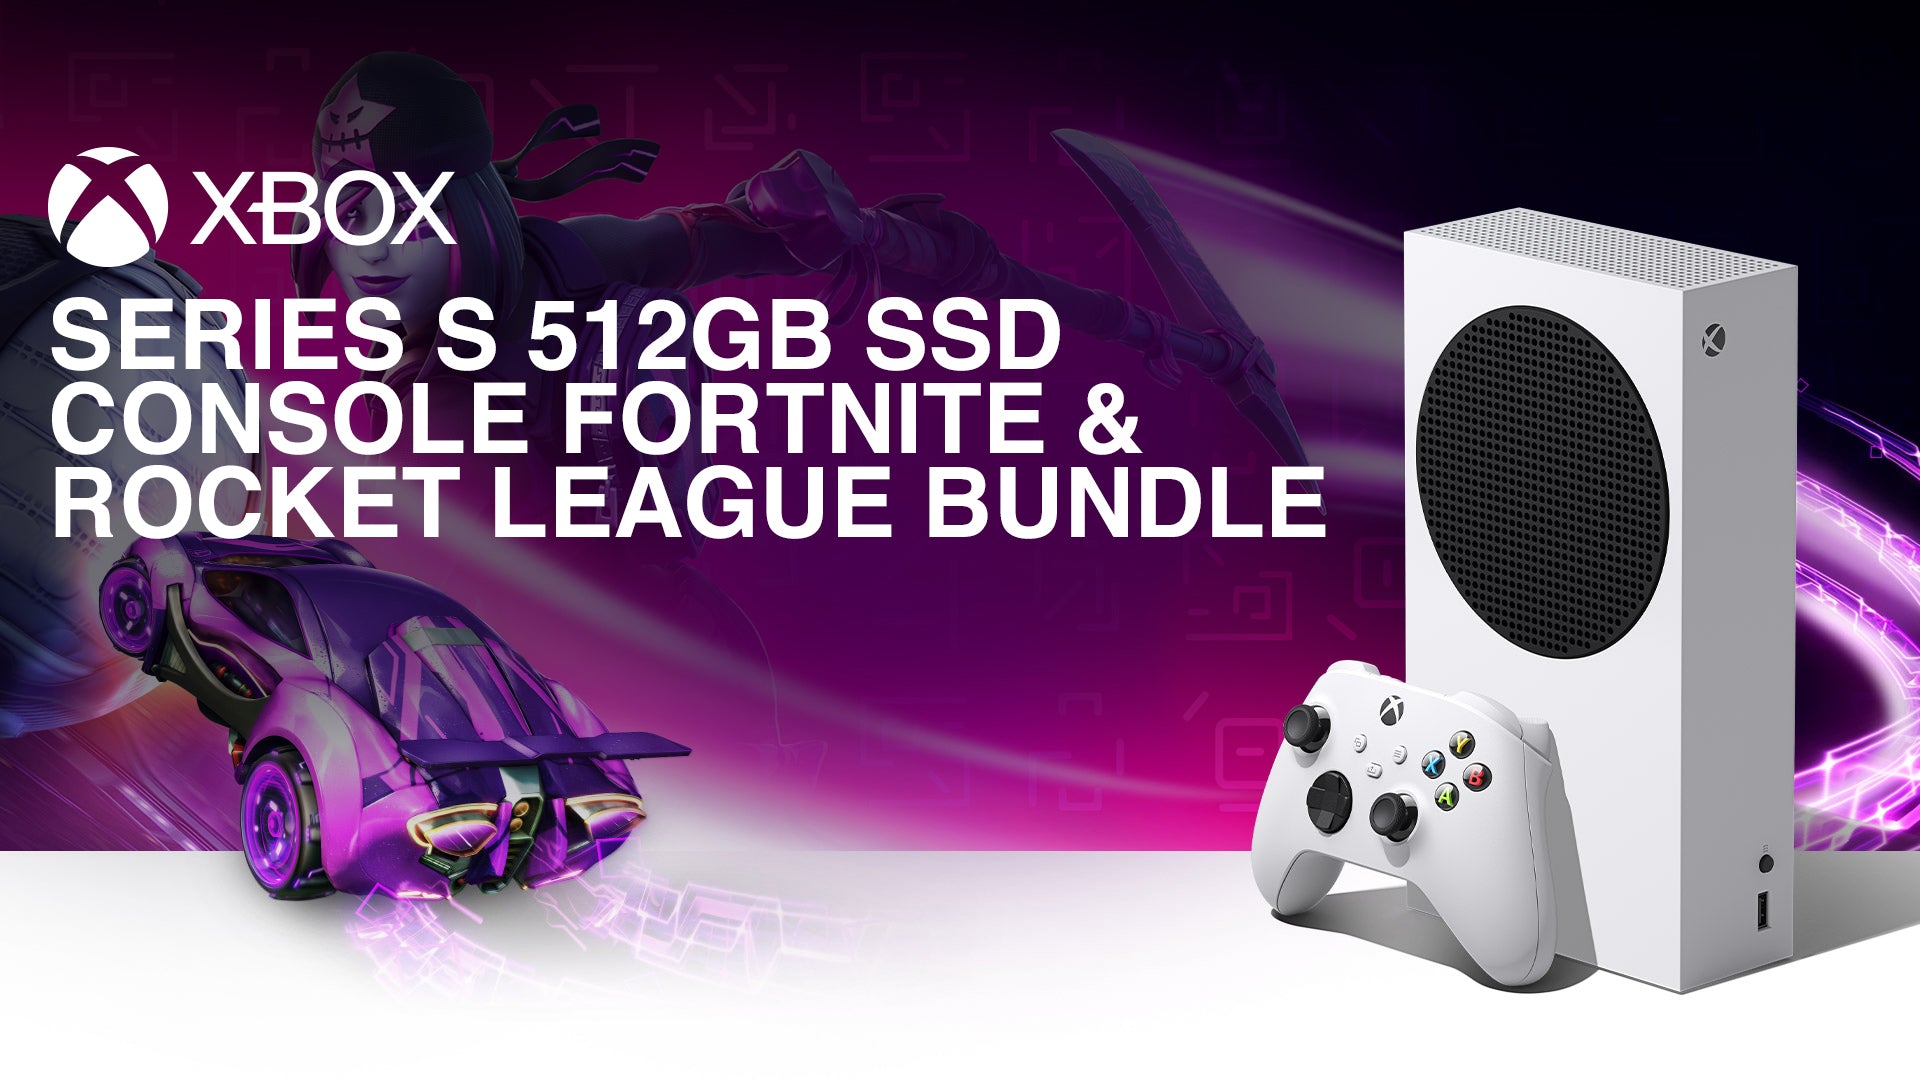 Free Xbox Series S bundle available to claim right now